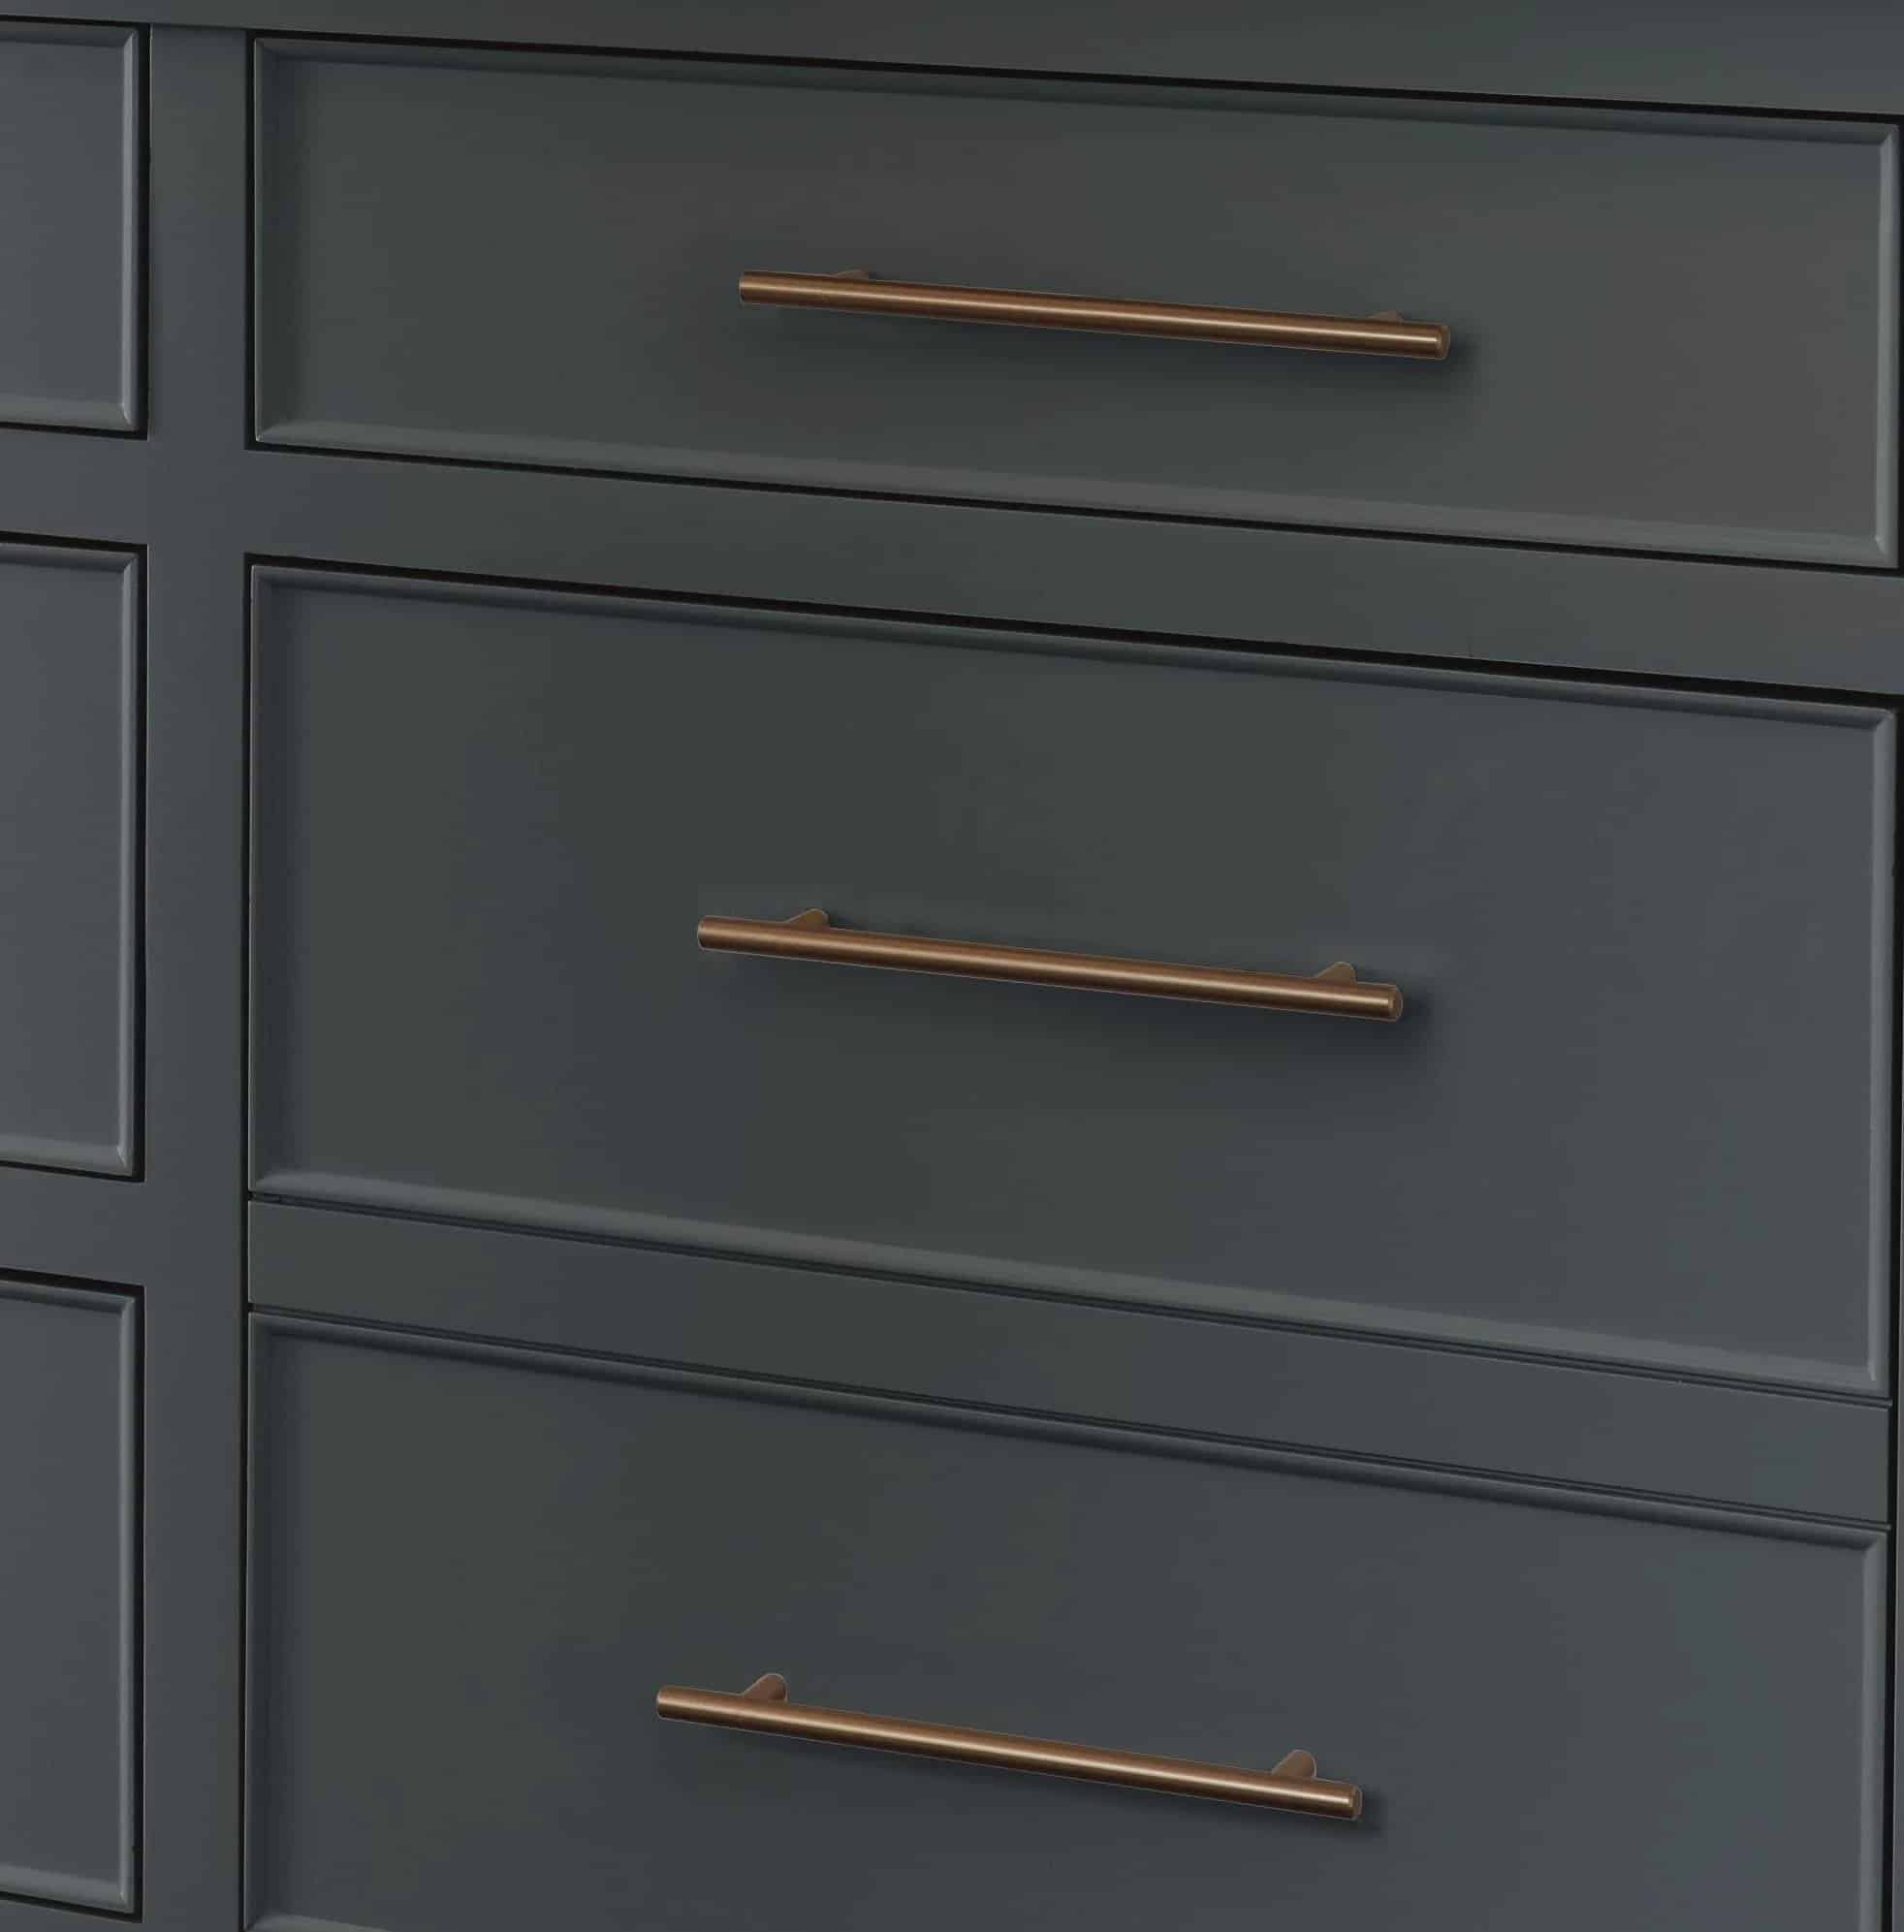 A Darker Champagne Colored Pull Fits Gorgeously With Dark Cabinets